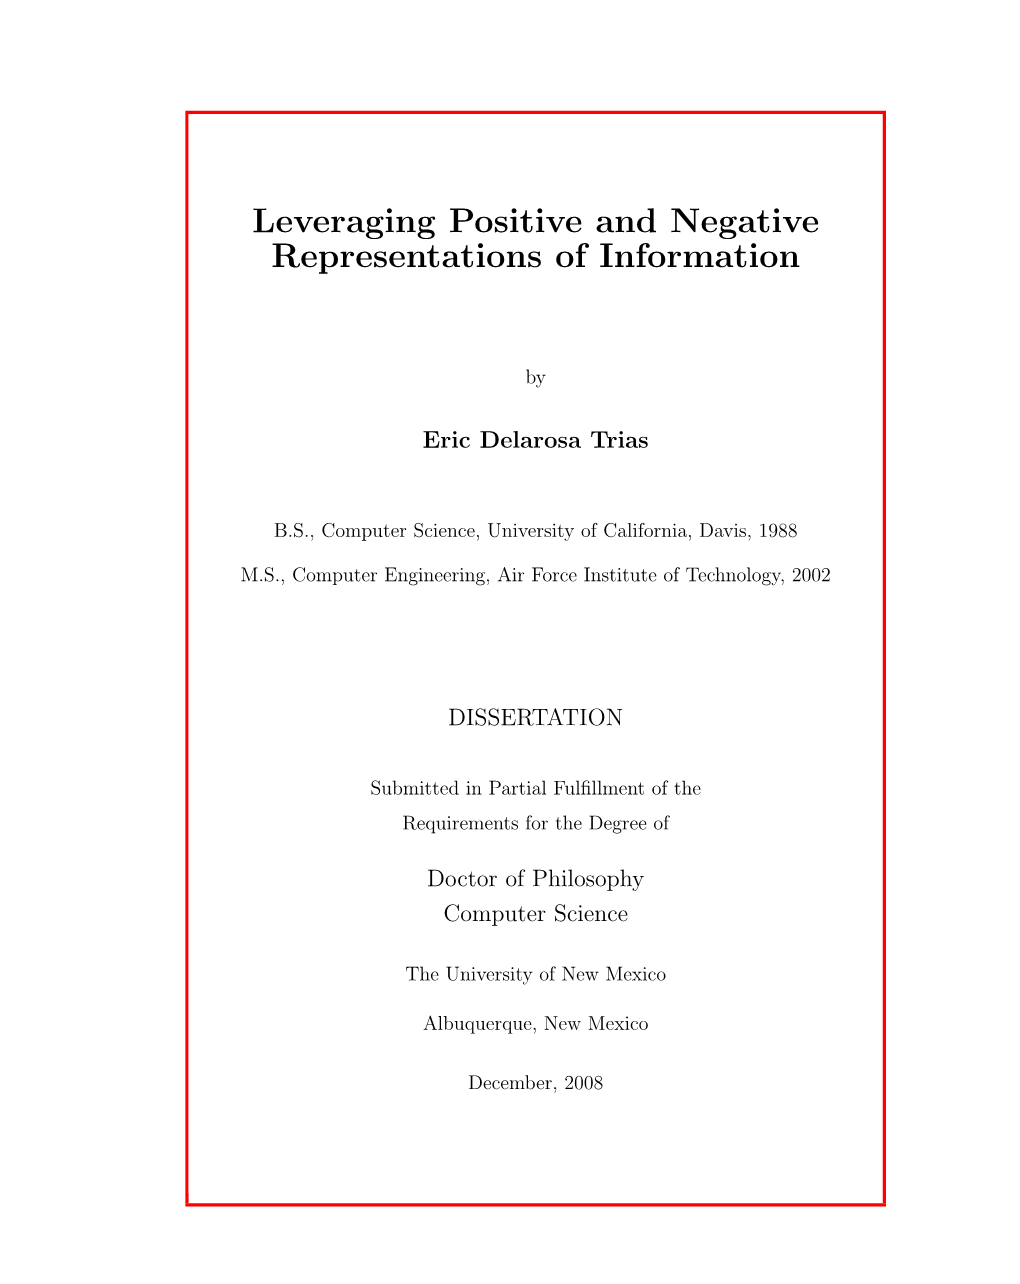 Leveraging Positive and Negative Representations of Information